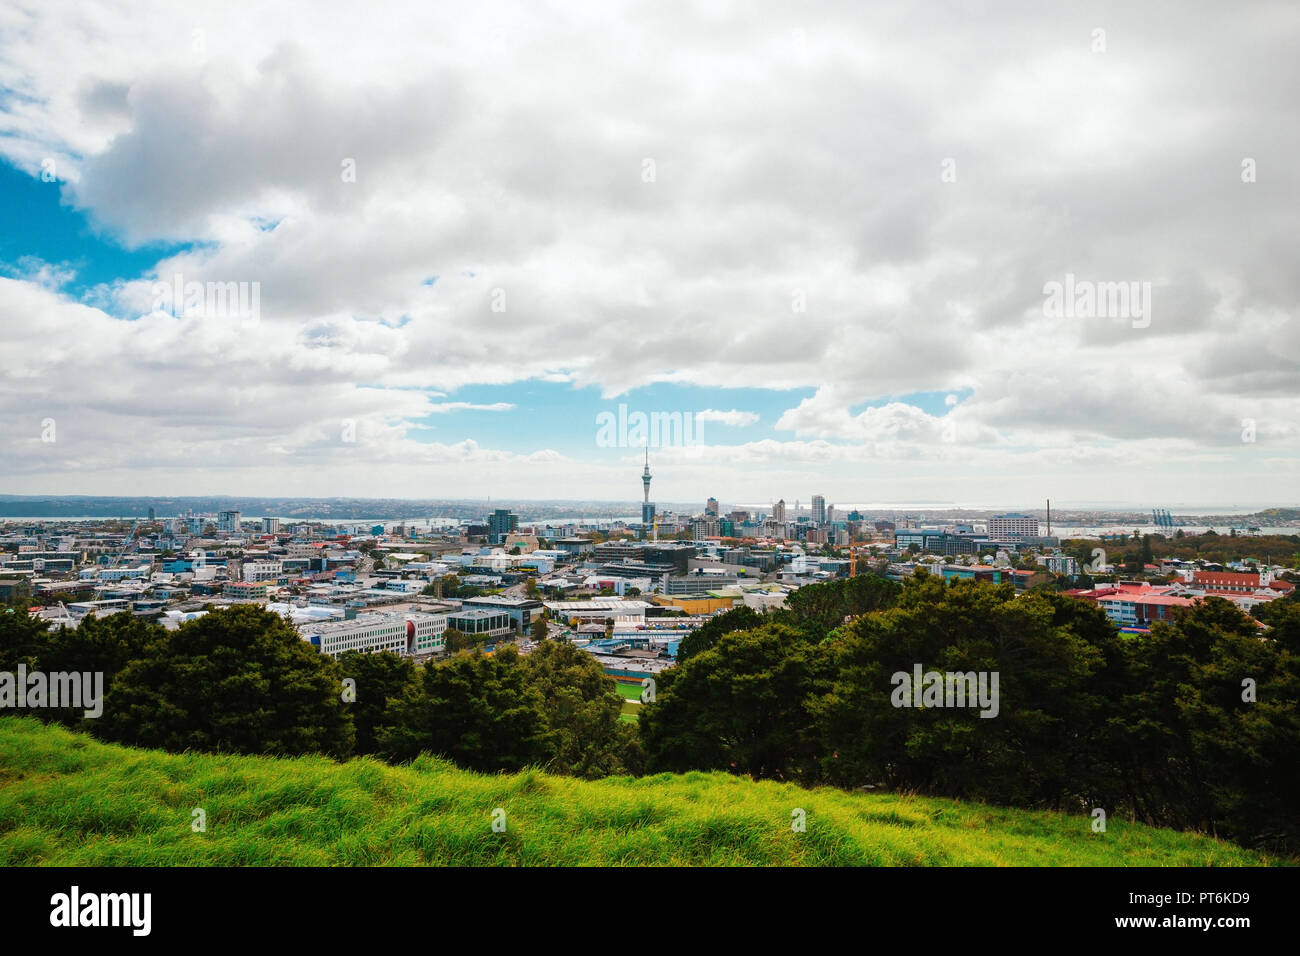 Auckland view from Mt Eden with a person walking along the path towards the city, New Zealand Stock Photo